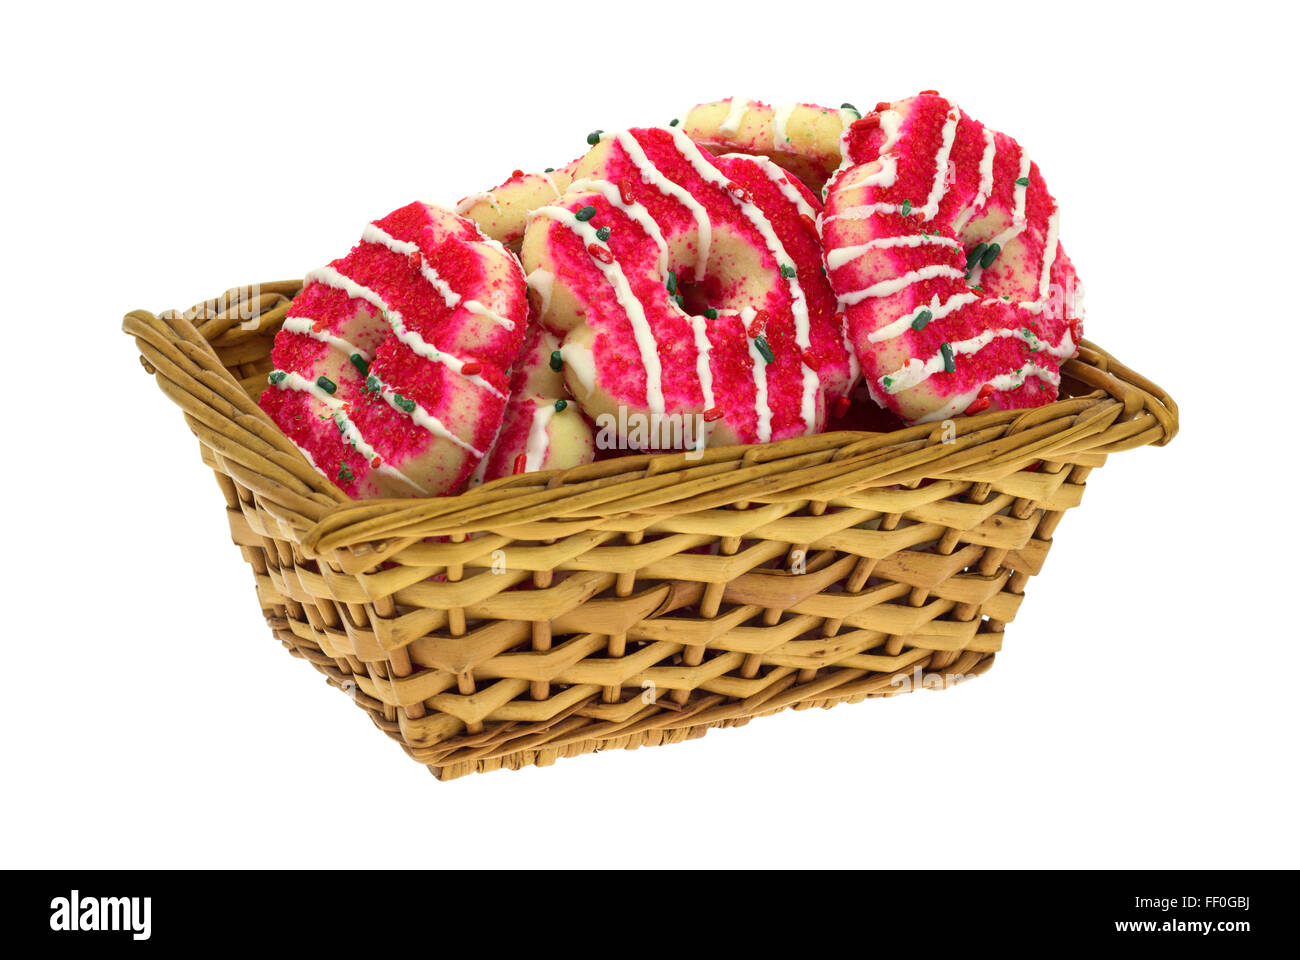 Several holiday decorated shortbread cookies in a small wicker basket isolated on a white background. Stock Photo